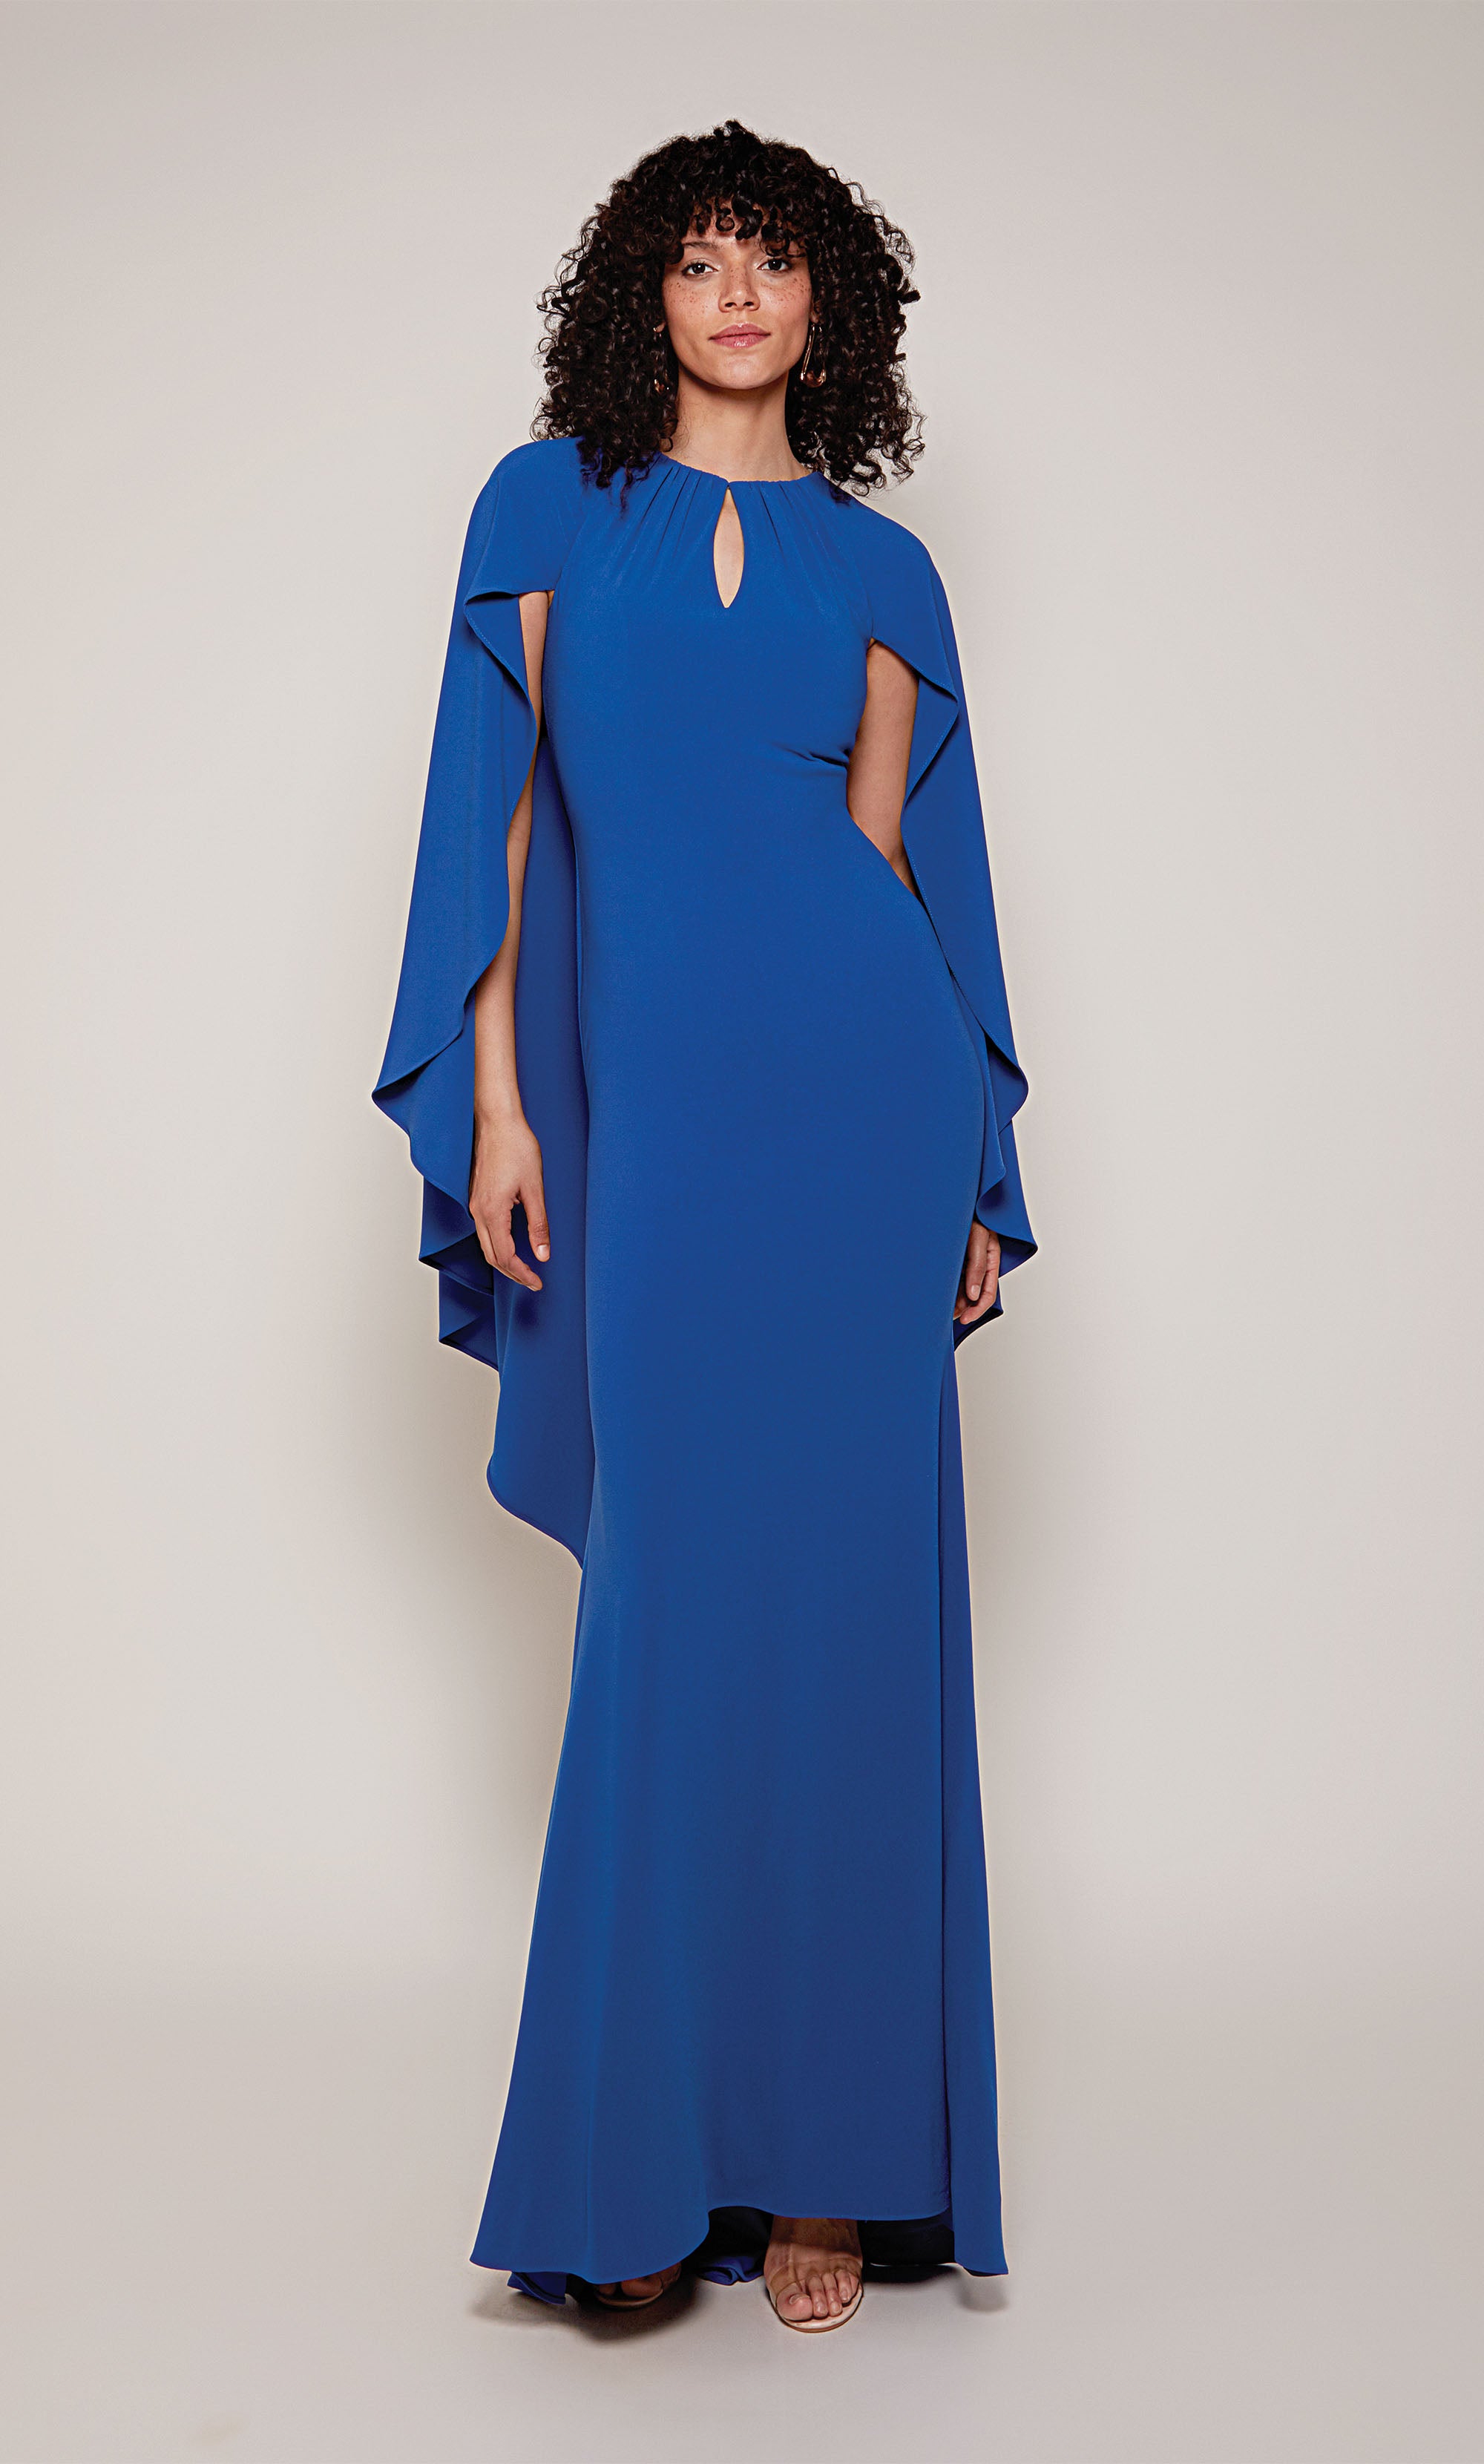 A long, fitted capelet dress with a front key hole and slightly flared skirt from knee to hemline in royal blue.